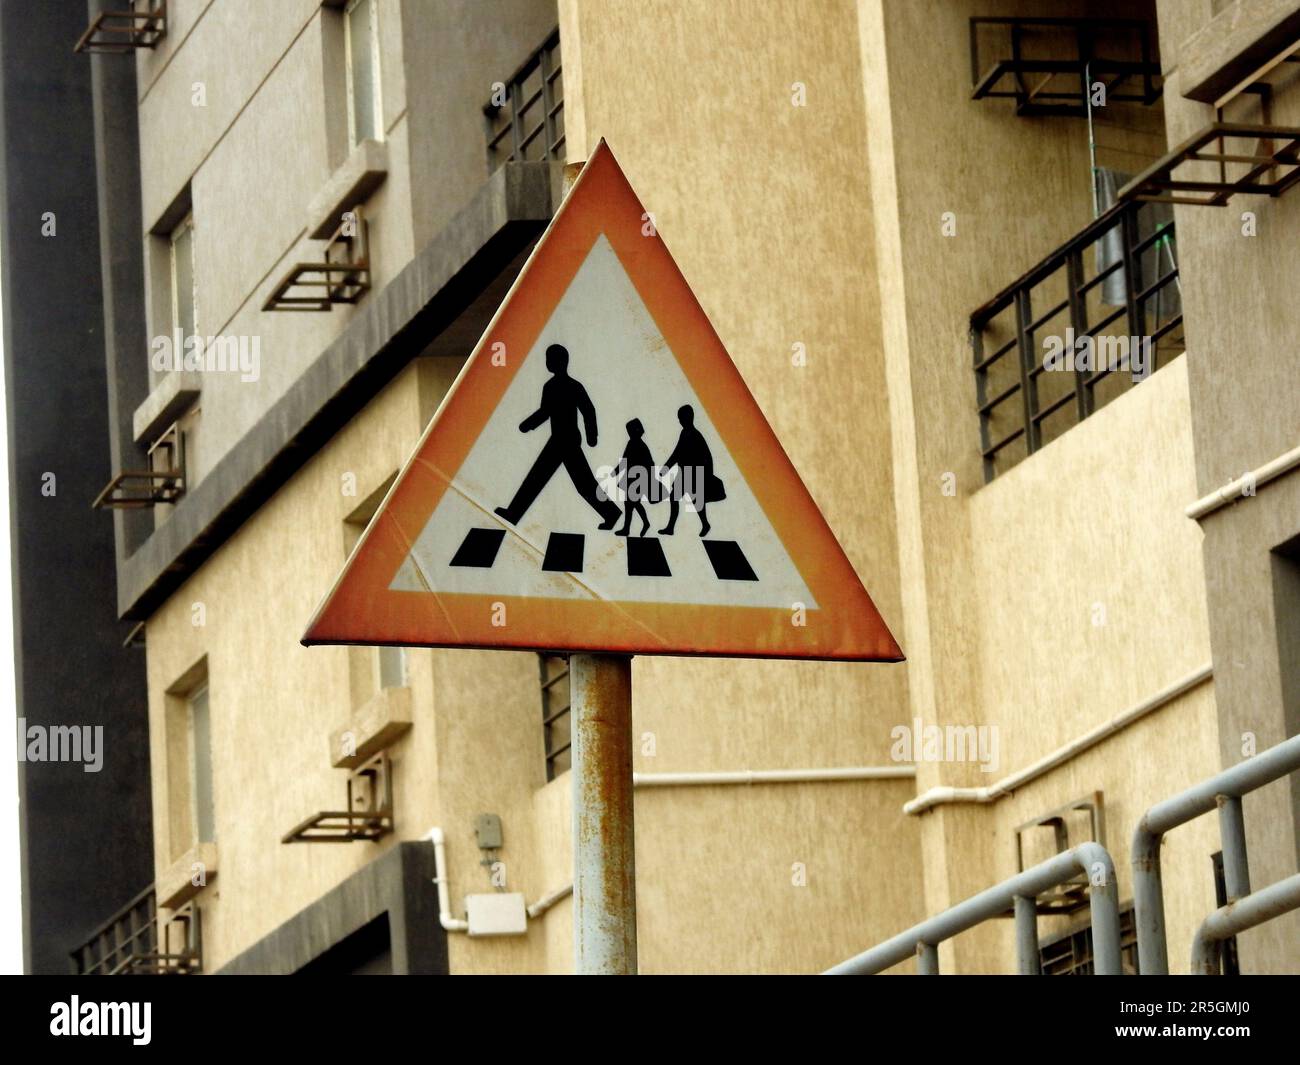 A school crossing sign at the side of the road to inform drivers to be alert of children crossing the street, school children warning crossing road si Stock Photo